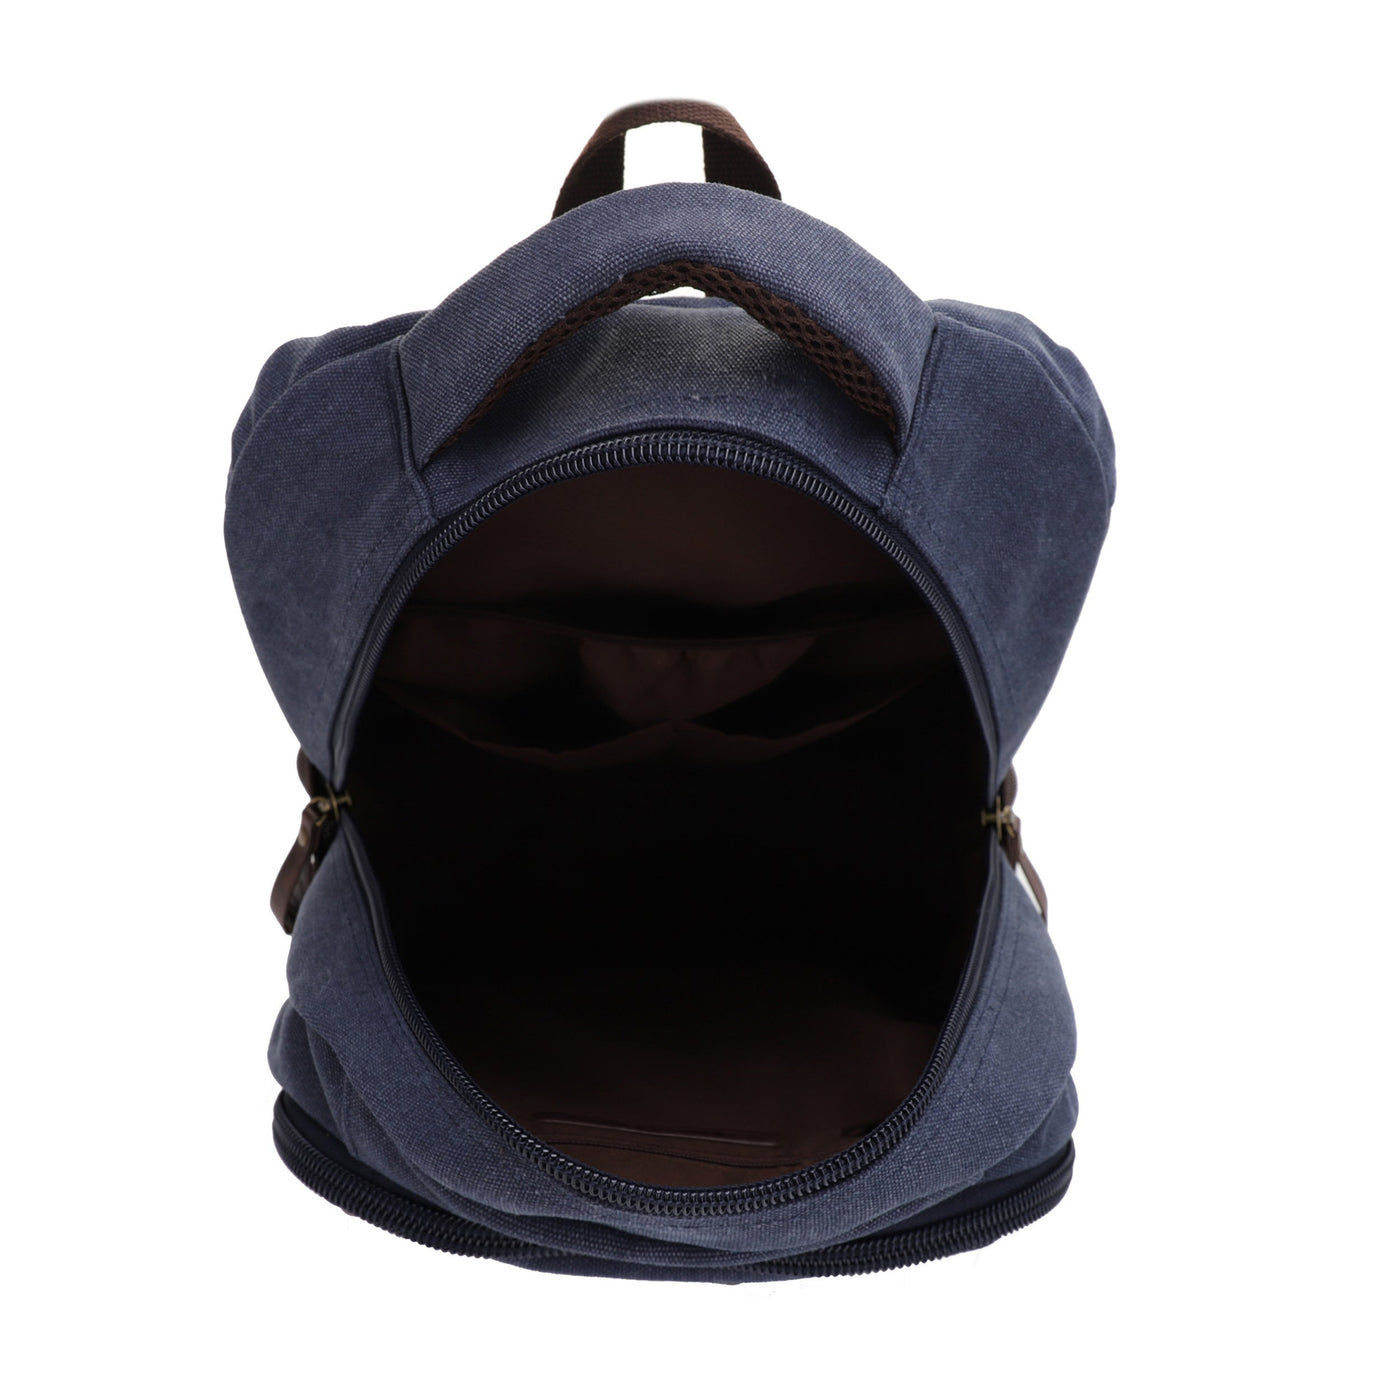 Alpine Concealed Carry Canvas Backpack